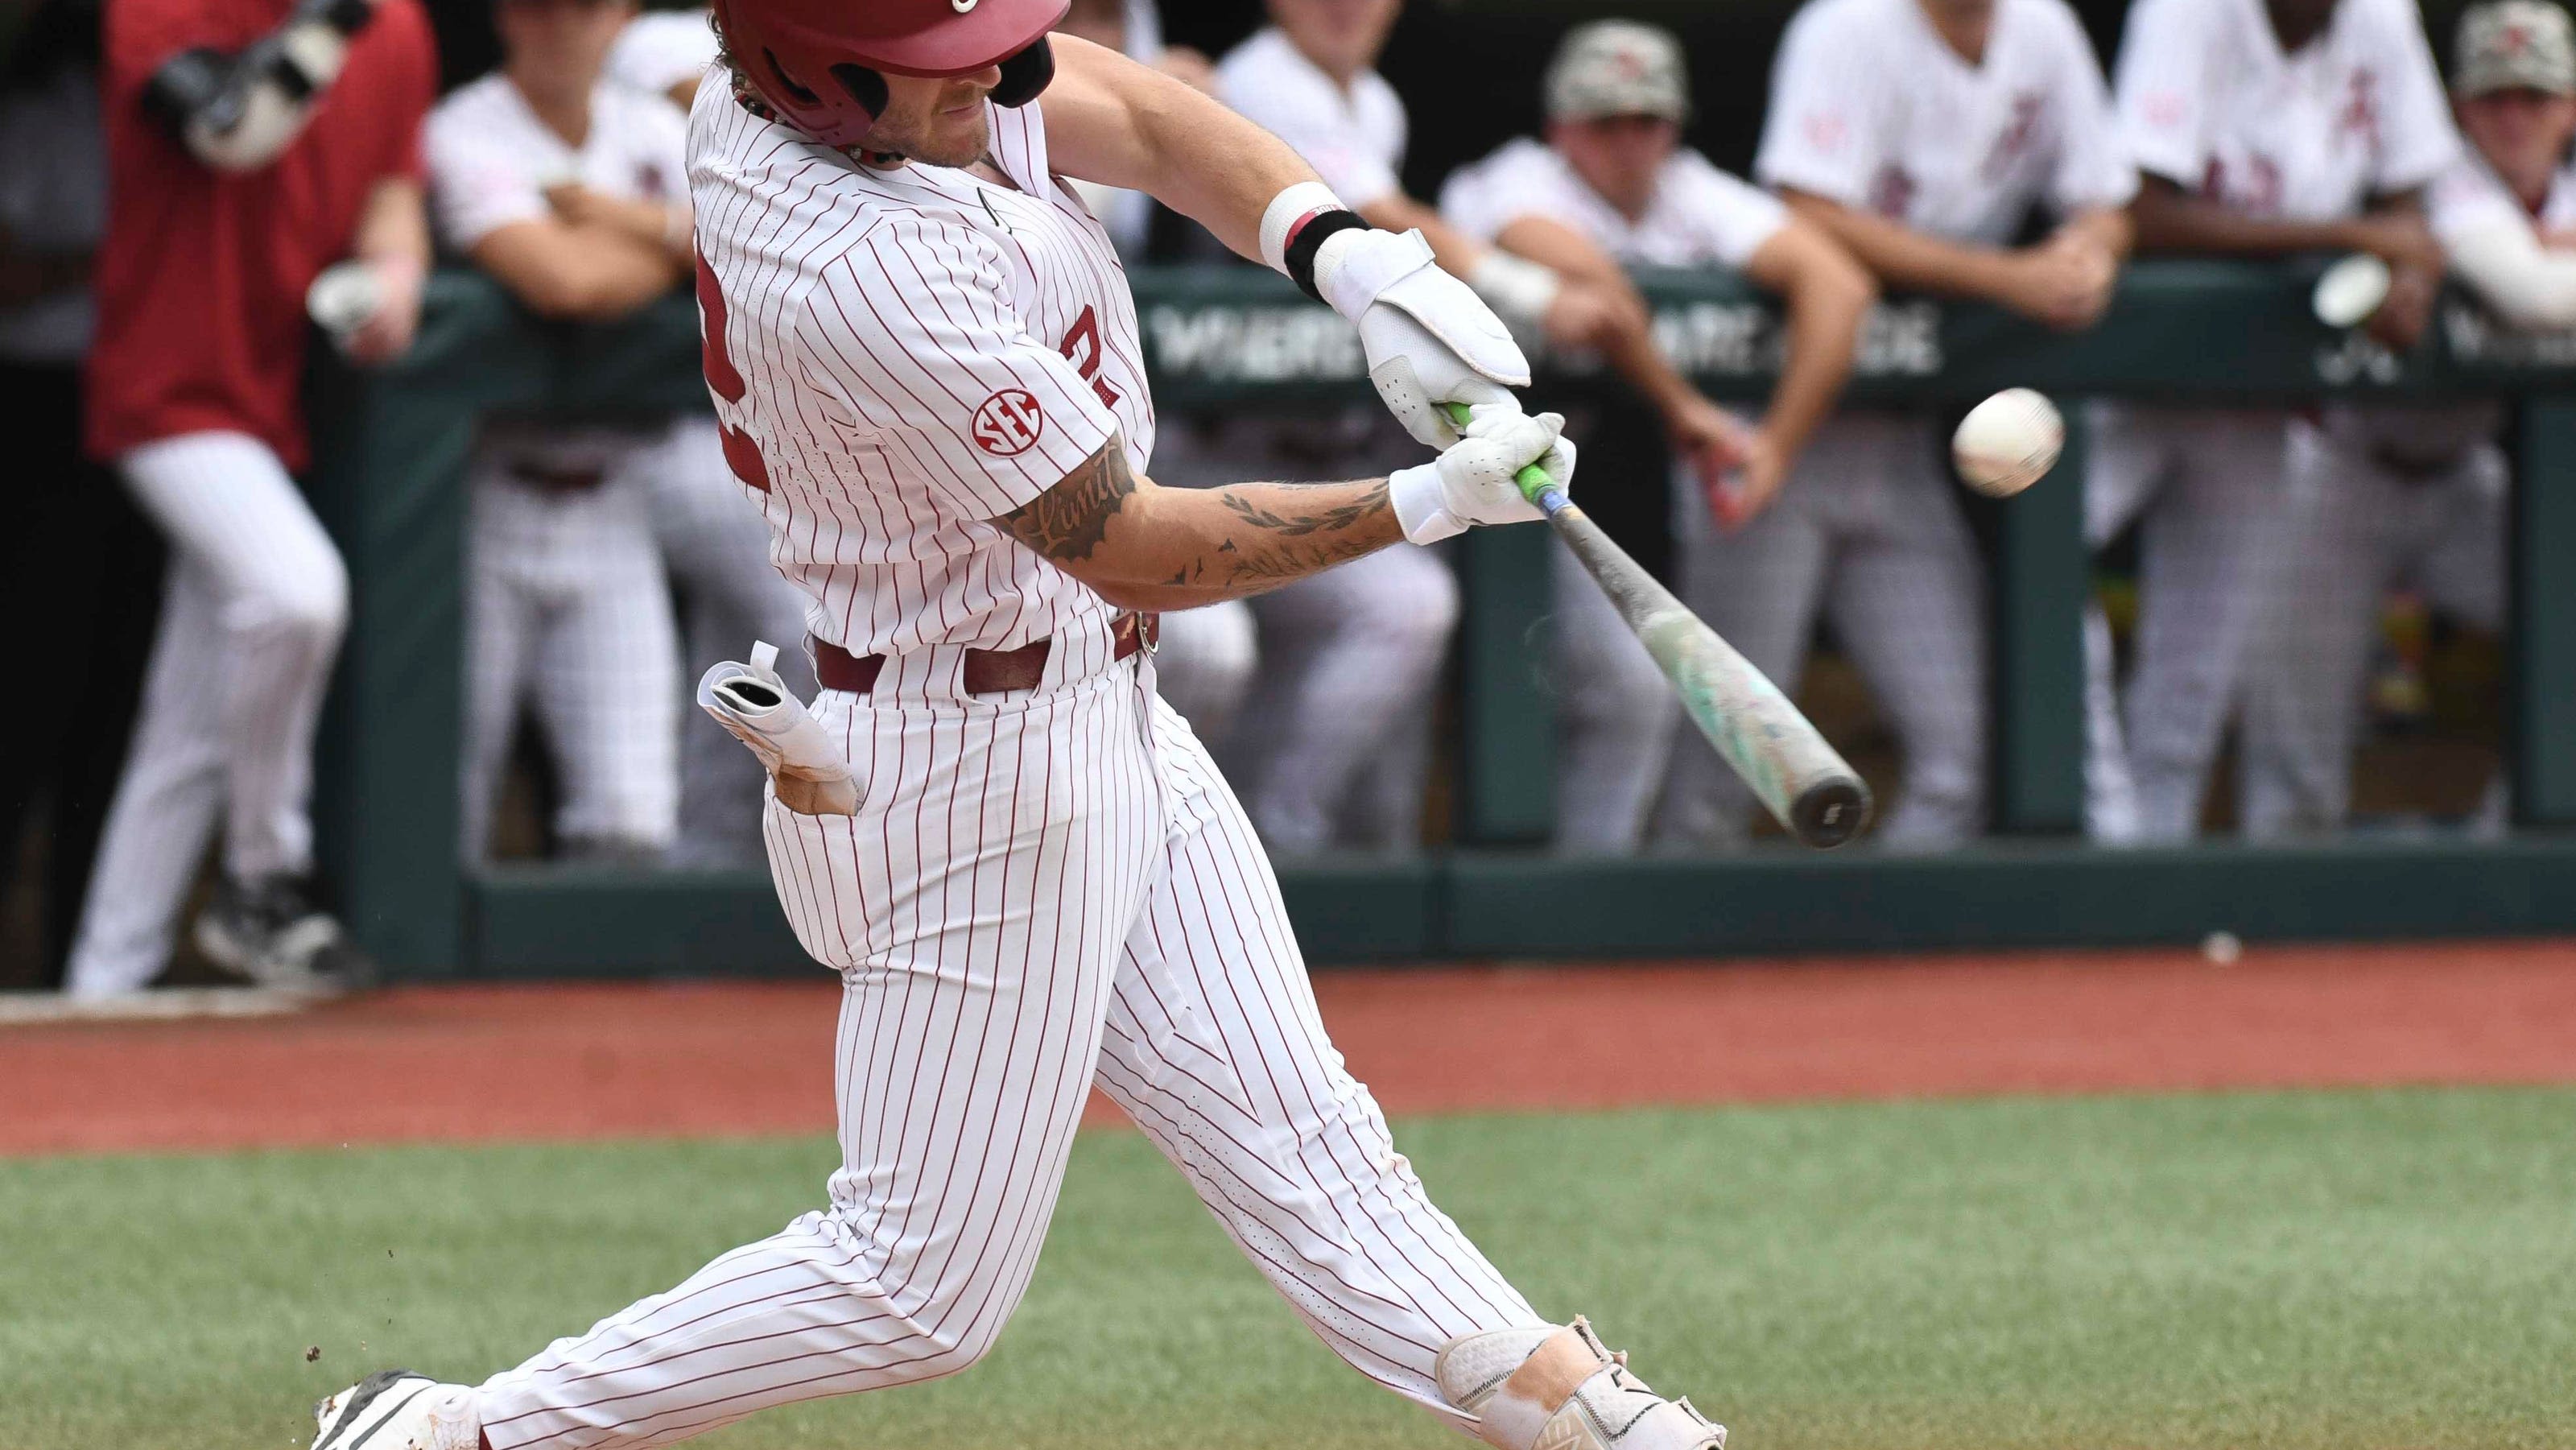 How to watch Alabama baseball vs. LSU; time, TV information for series